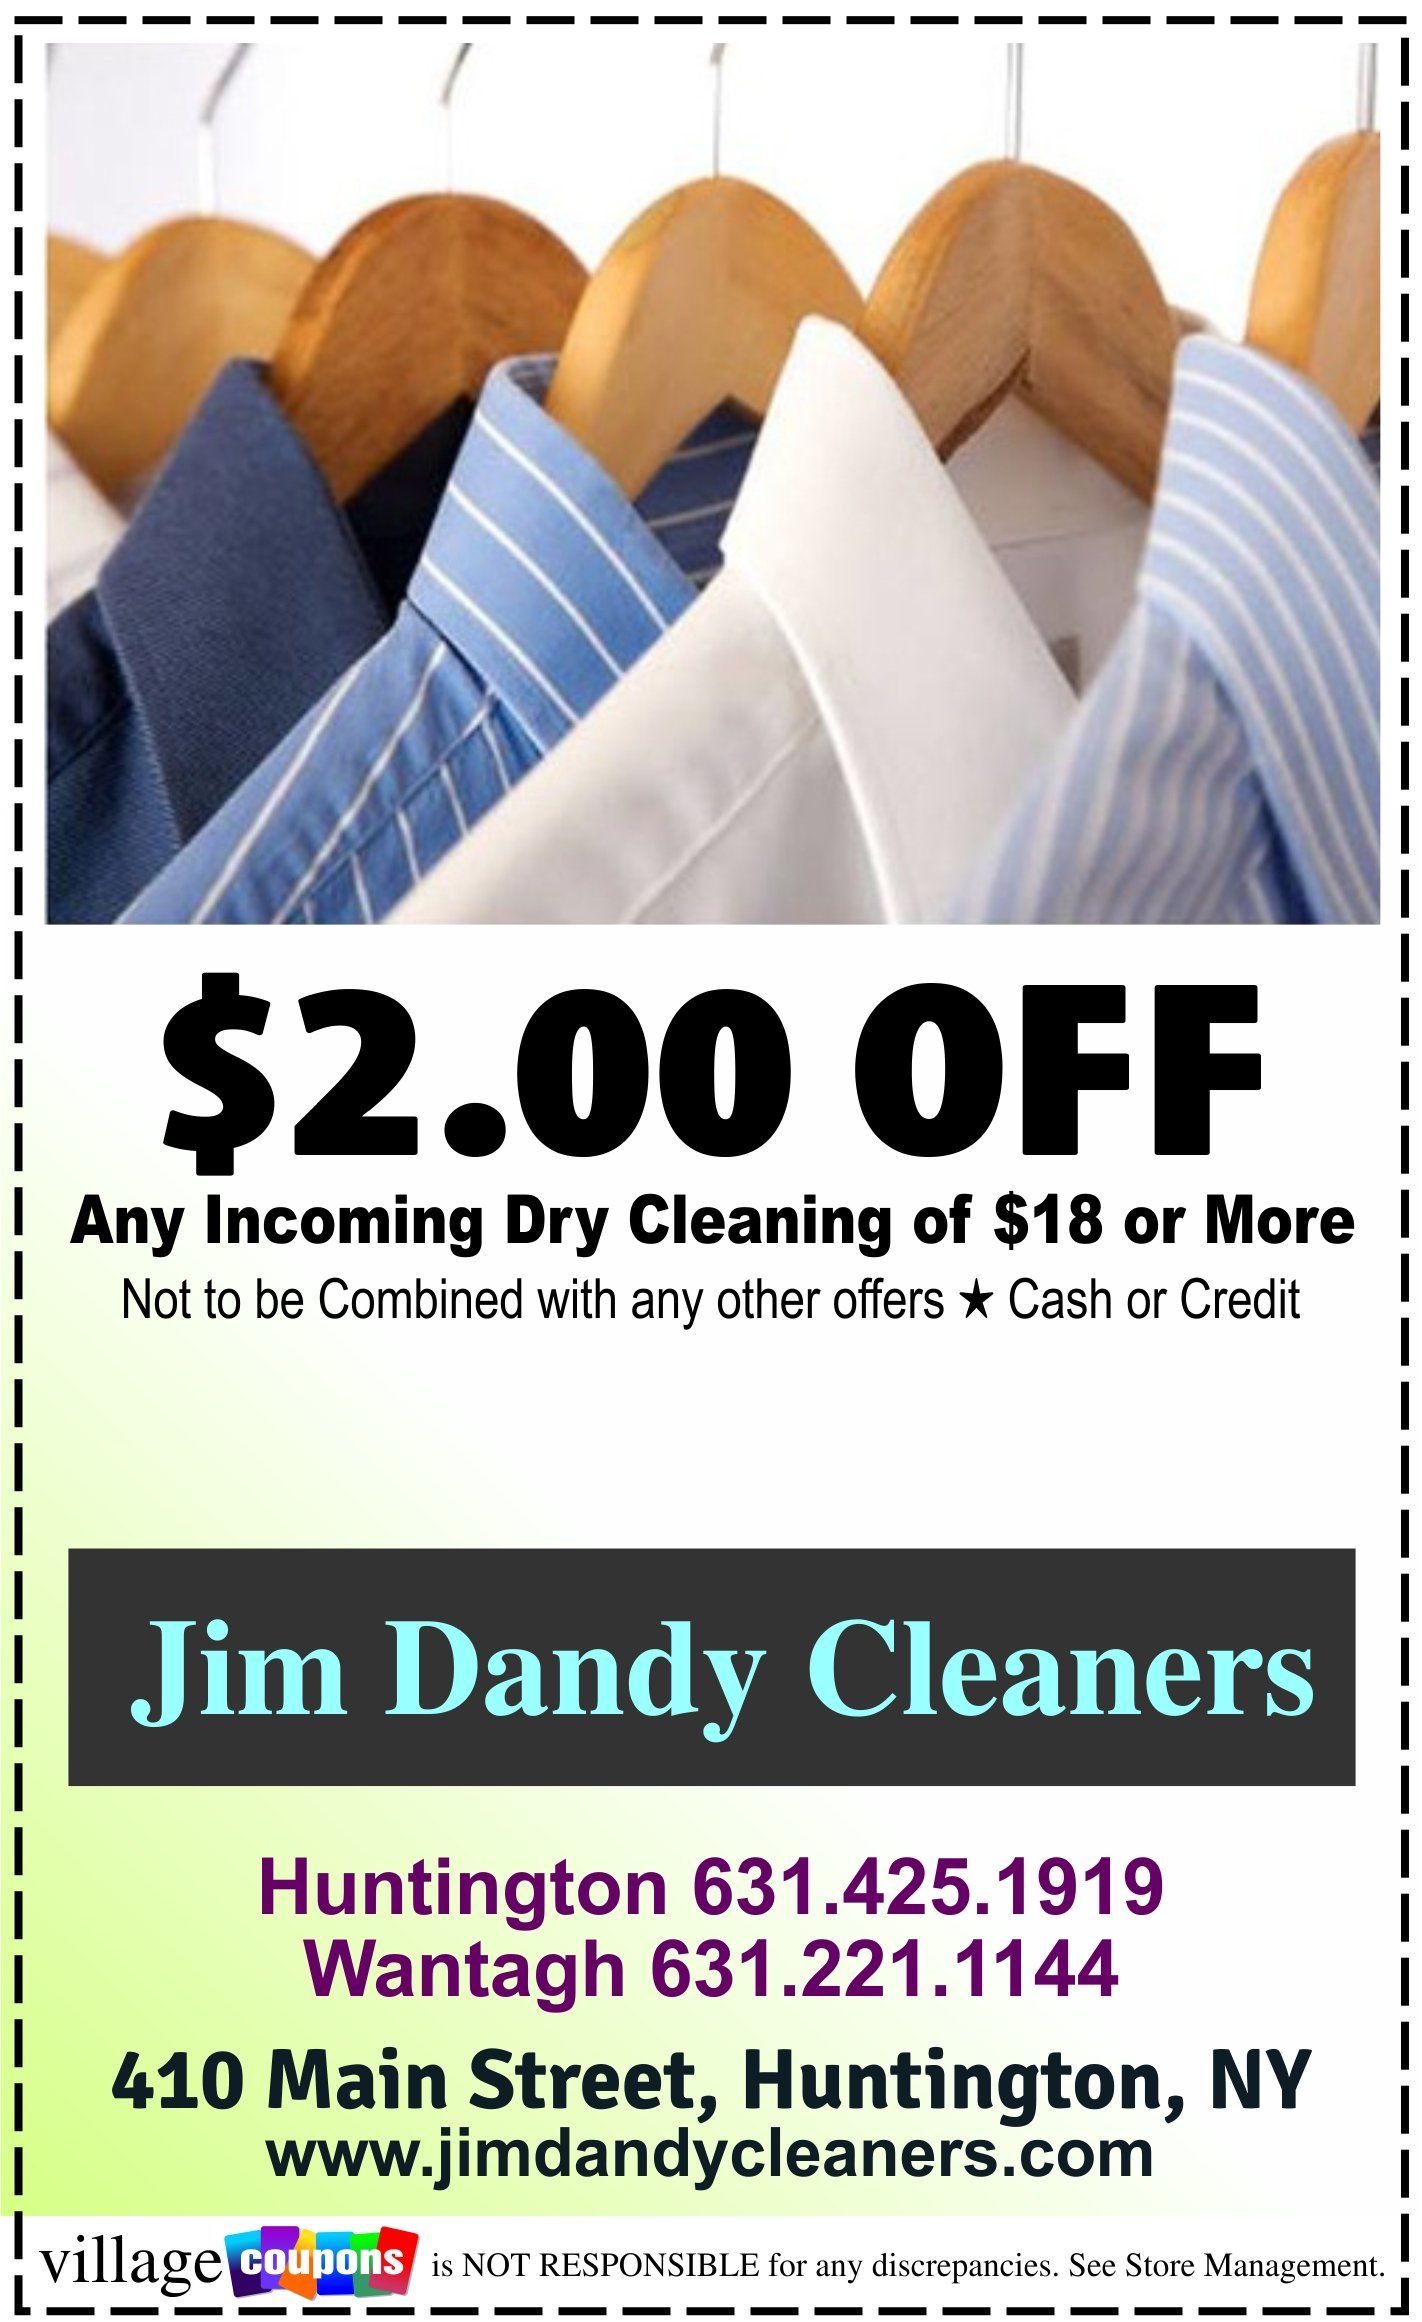 A coupon for jim dandy cleaners in huntington new york